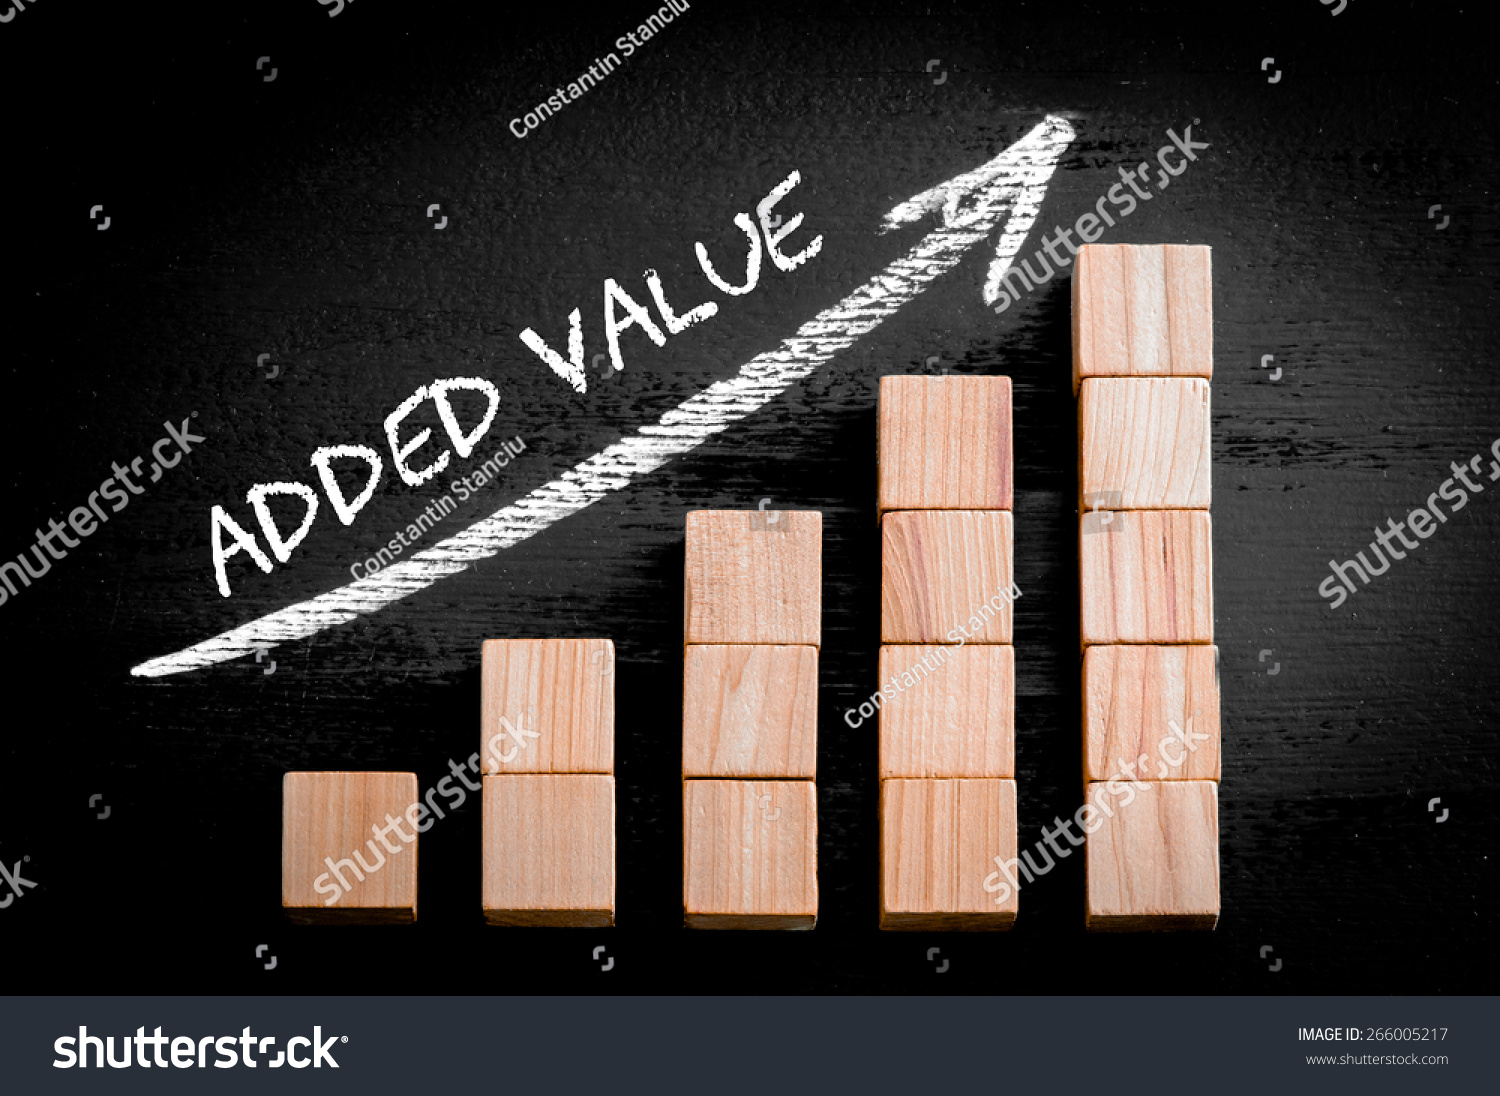 Words Added Value on ascending arrow above bar graph of Wooden small cubes isolated on black background. Chalk drawing on blackboard. Business Concept image. #266005217